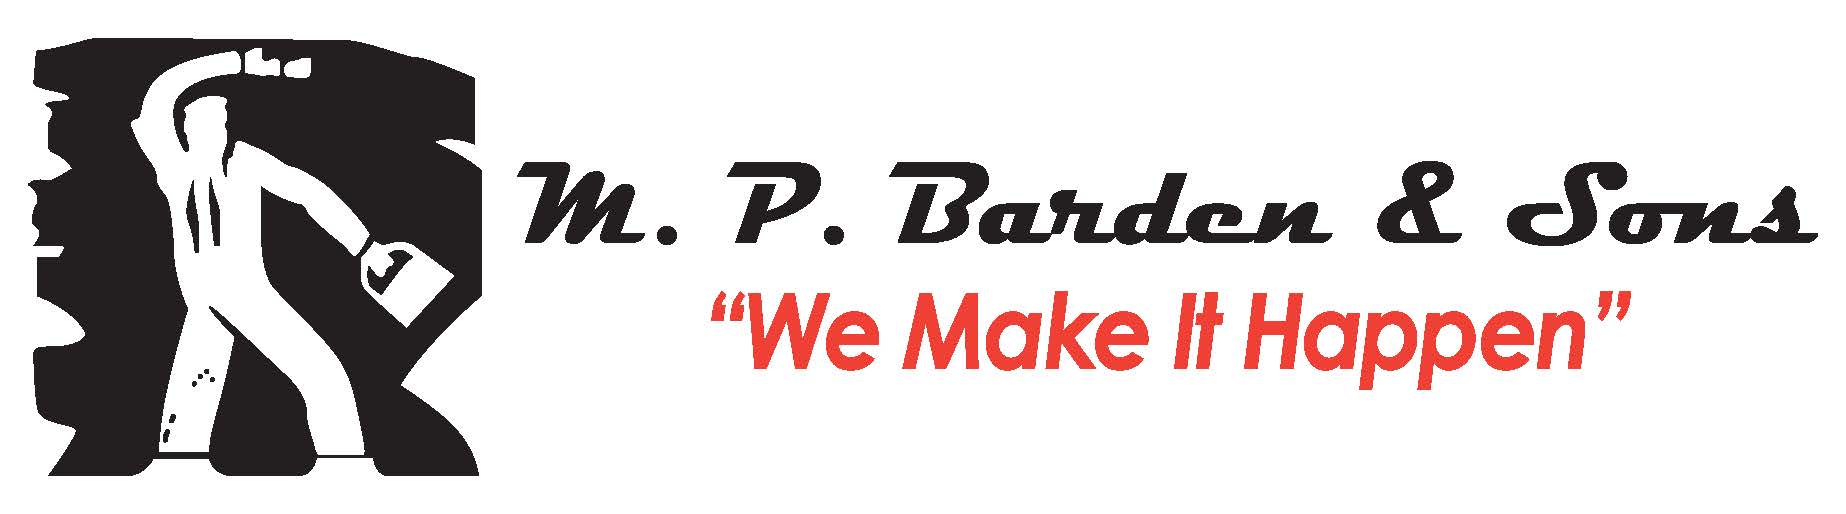 M.P. Barden & Sons